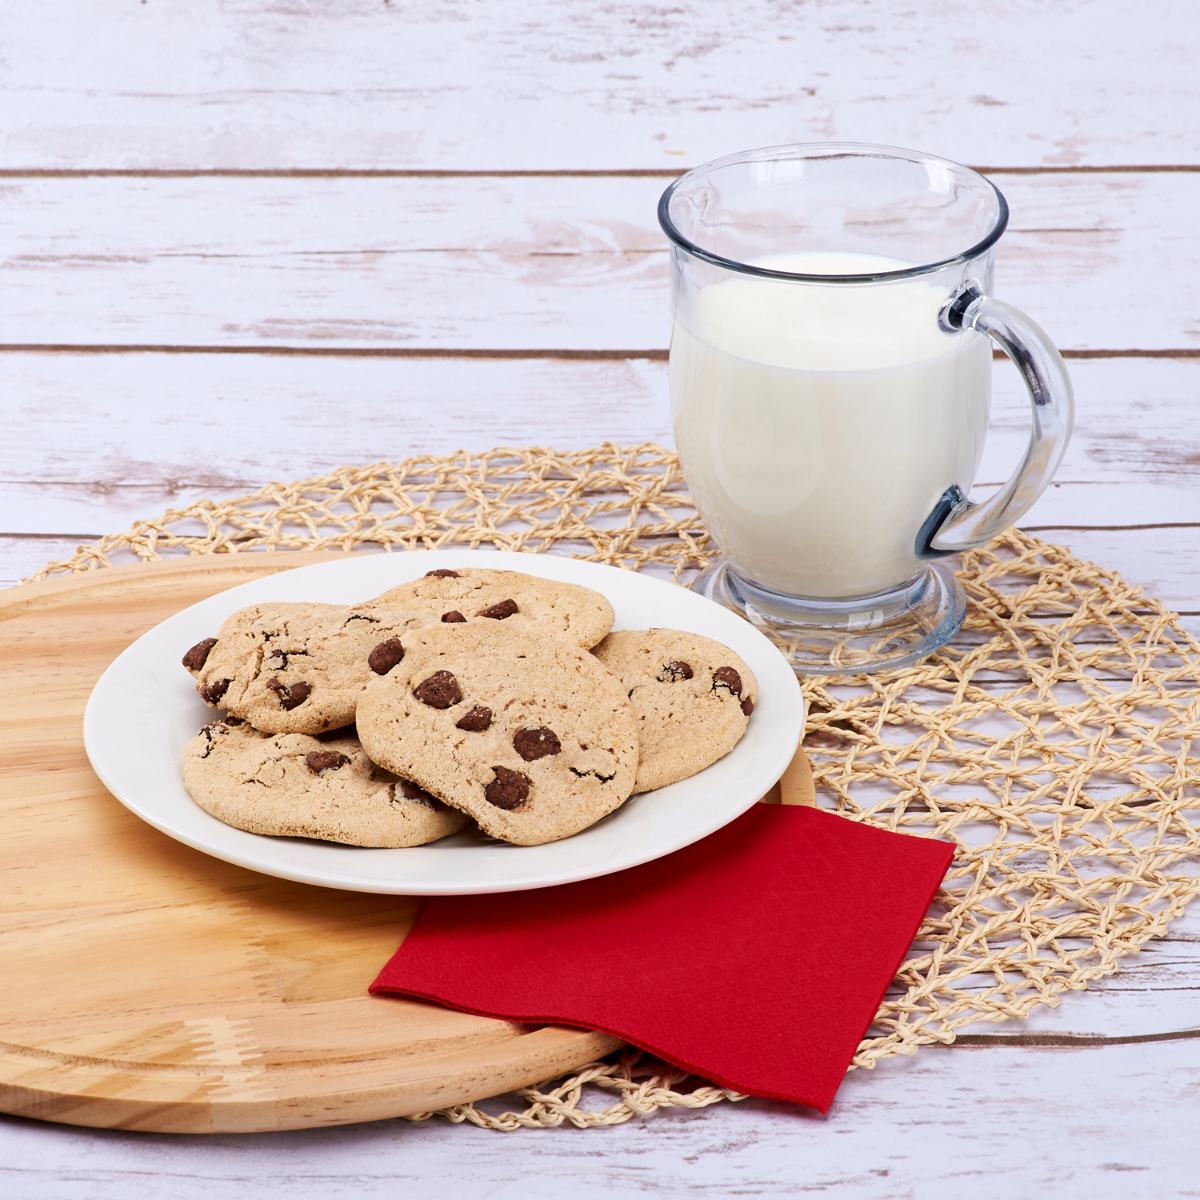 Choco chip cookies and a glass of milk with Karat red beverage napkins